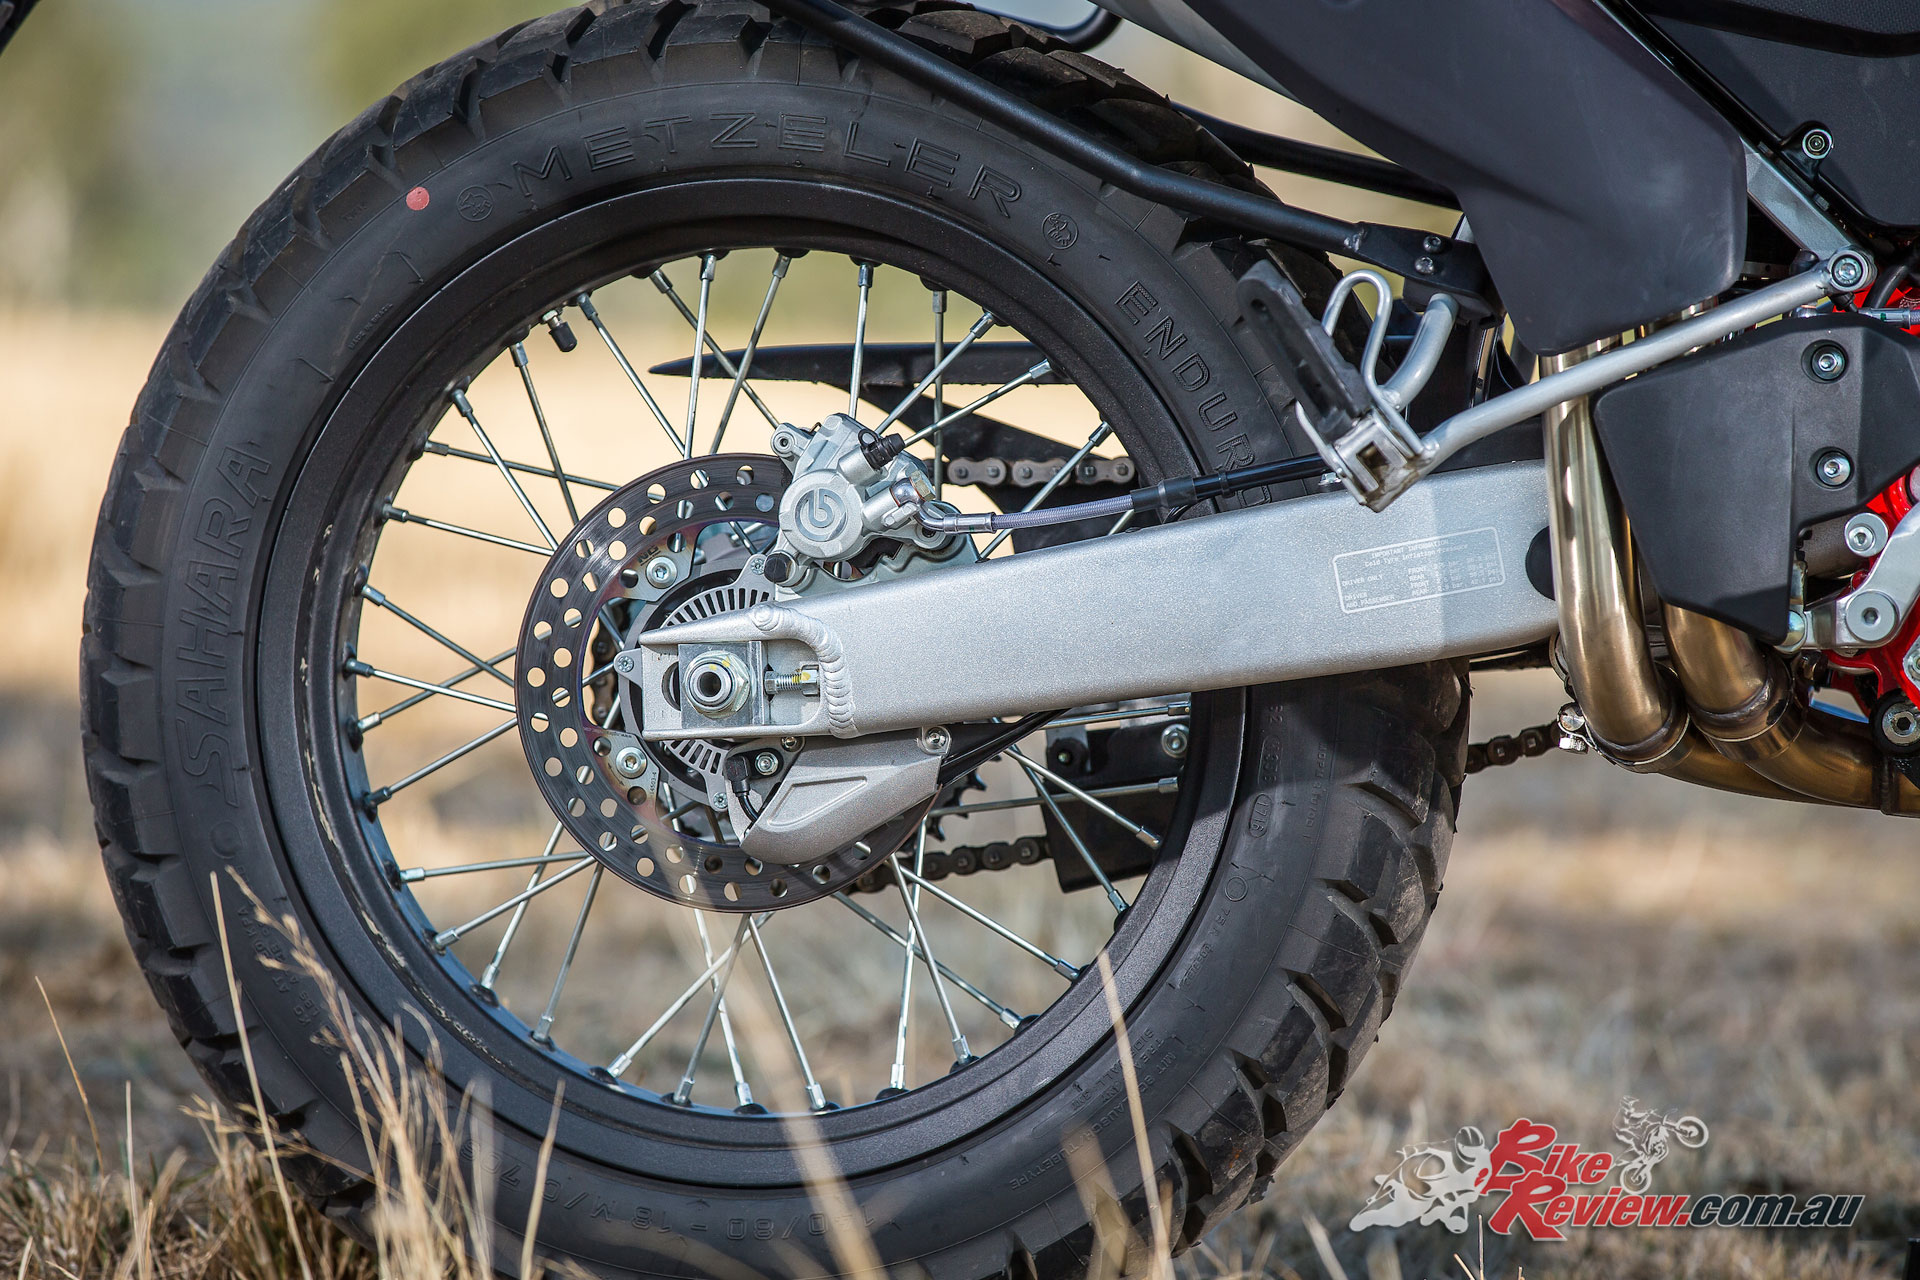 An adjustable rear shock offers preload and rebound, with a 240mm rear rotor and aluminium swingarm